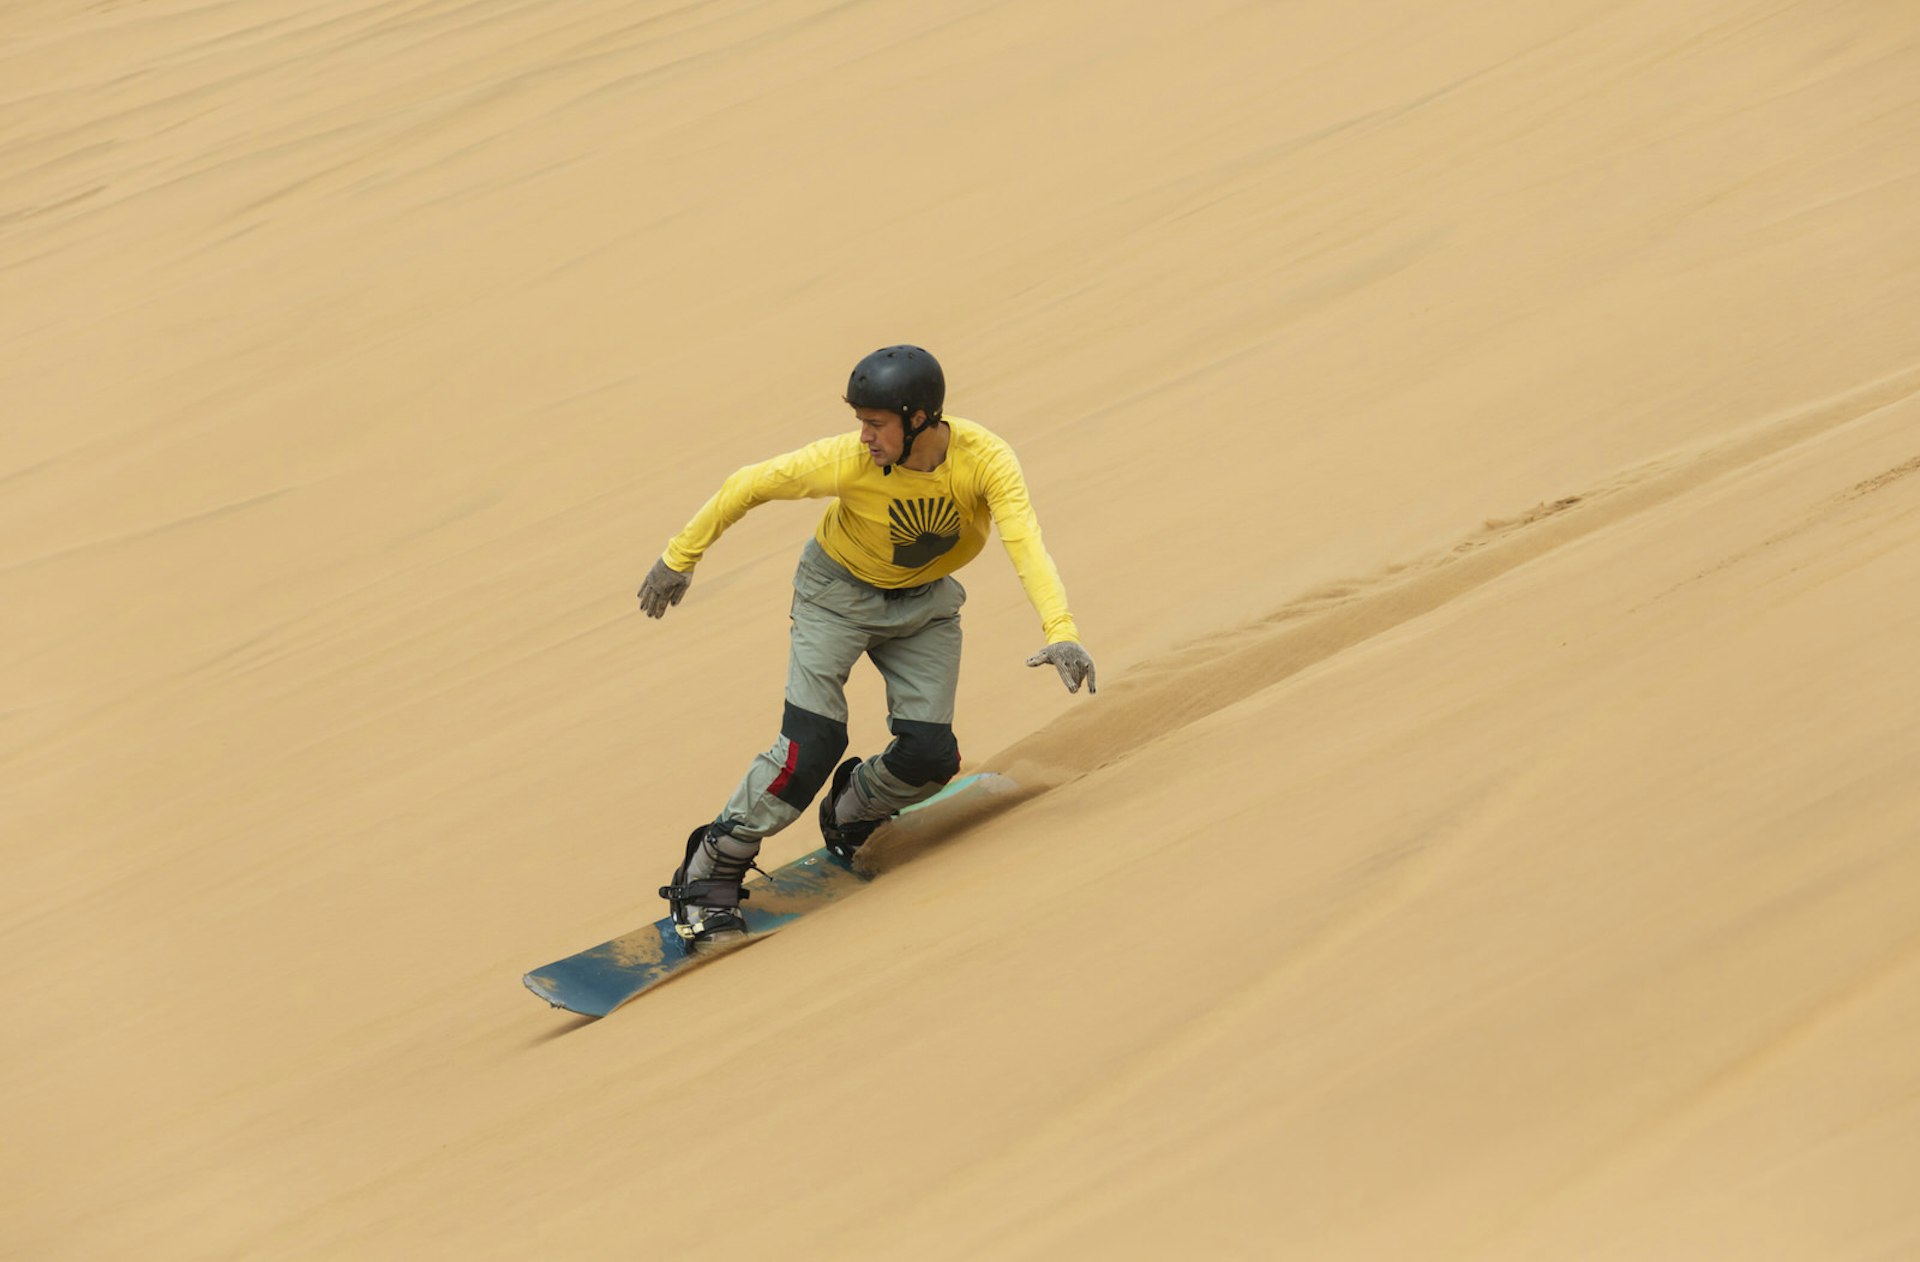 The Namib Desert, the oldest in the world, is reputed to house some of the largest sand dunes on this planet. Come conquer these constantly shifting and powerfully towering beauties by zooming down the sheer slip faces on a traditional Swakopmund sandboard or carve up the dune with style and skill on a snowboard adapted for sand.